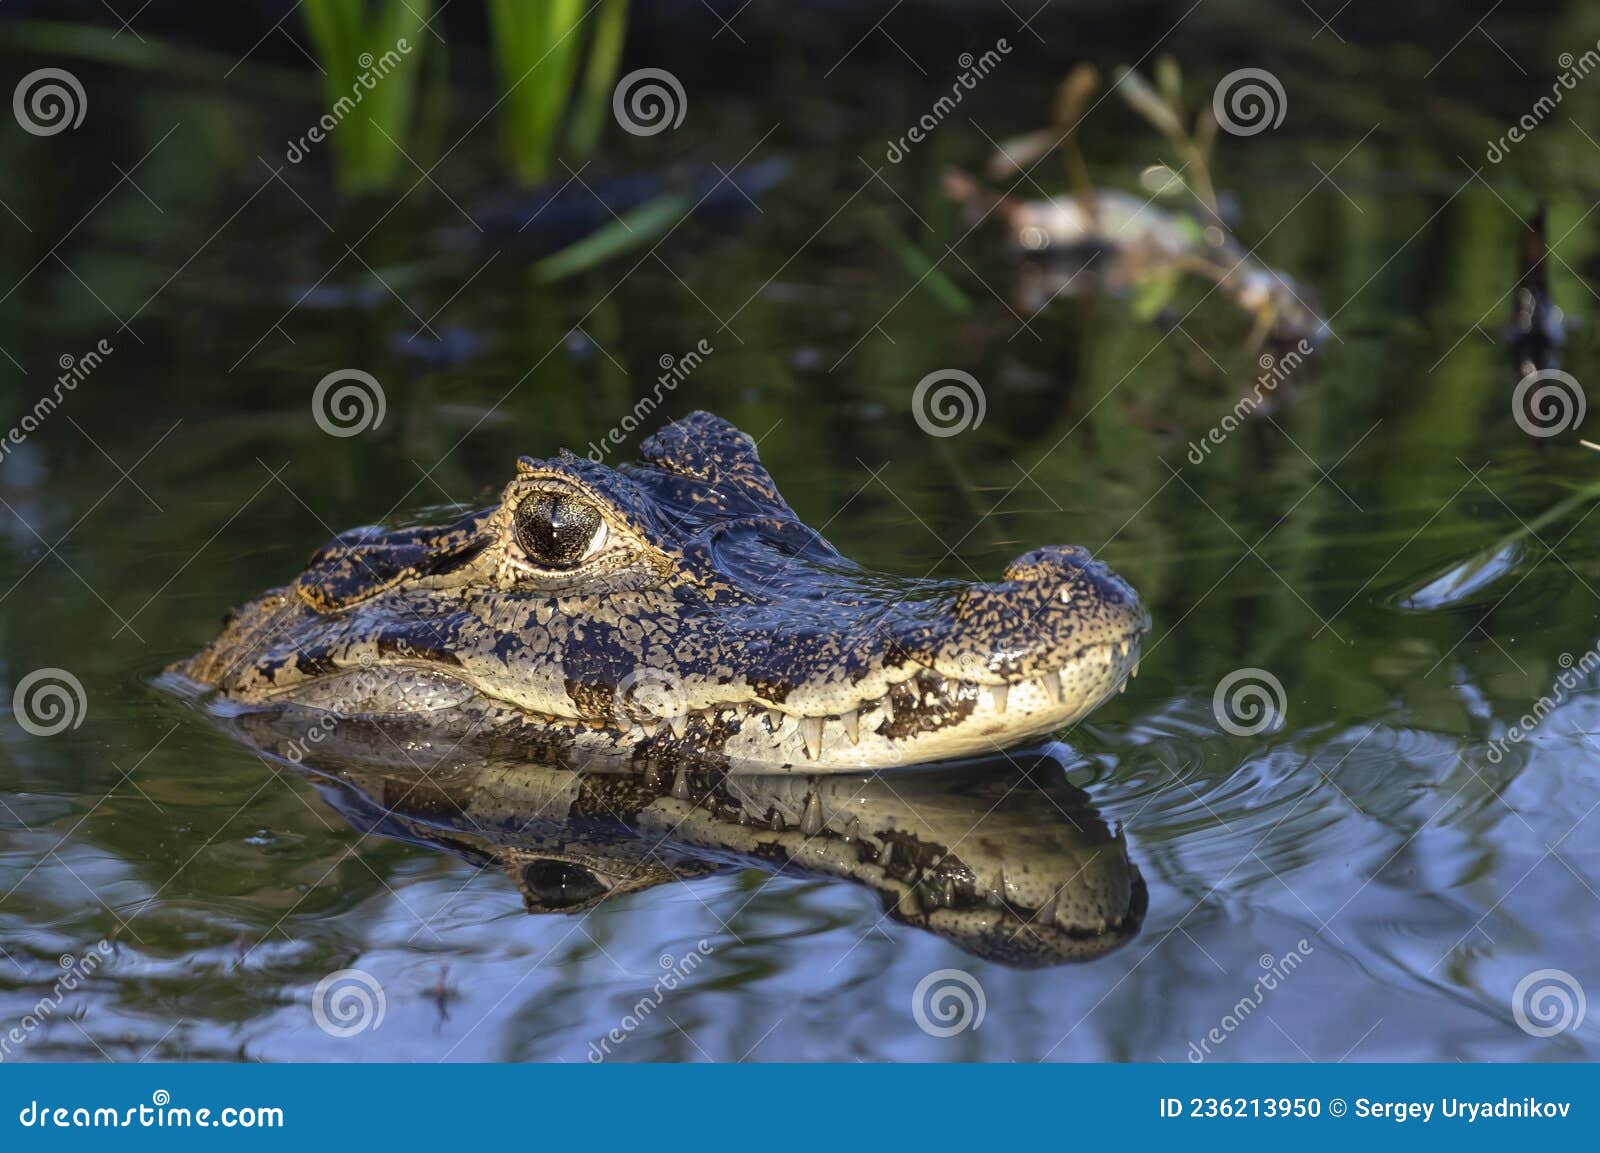 caiman in the water.the yacare caiman caiman yacare, also known commonly as the jacare caiman. side view. natrural habitat.